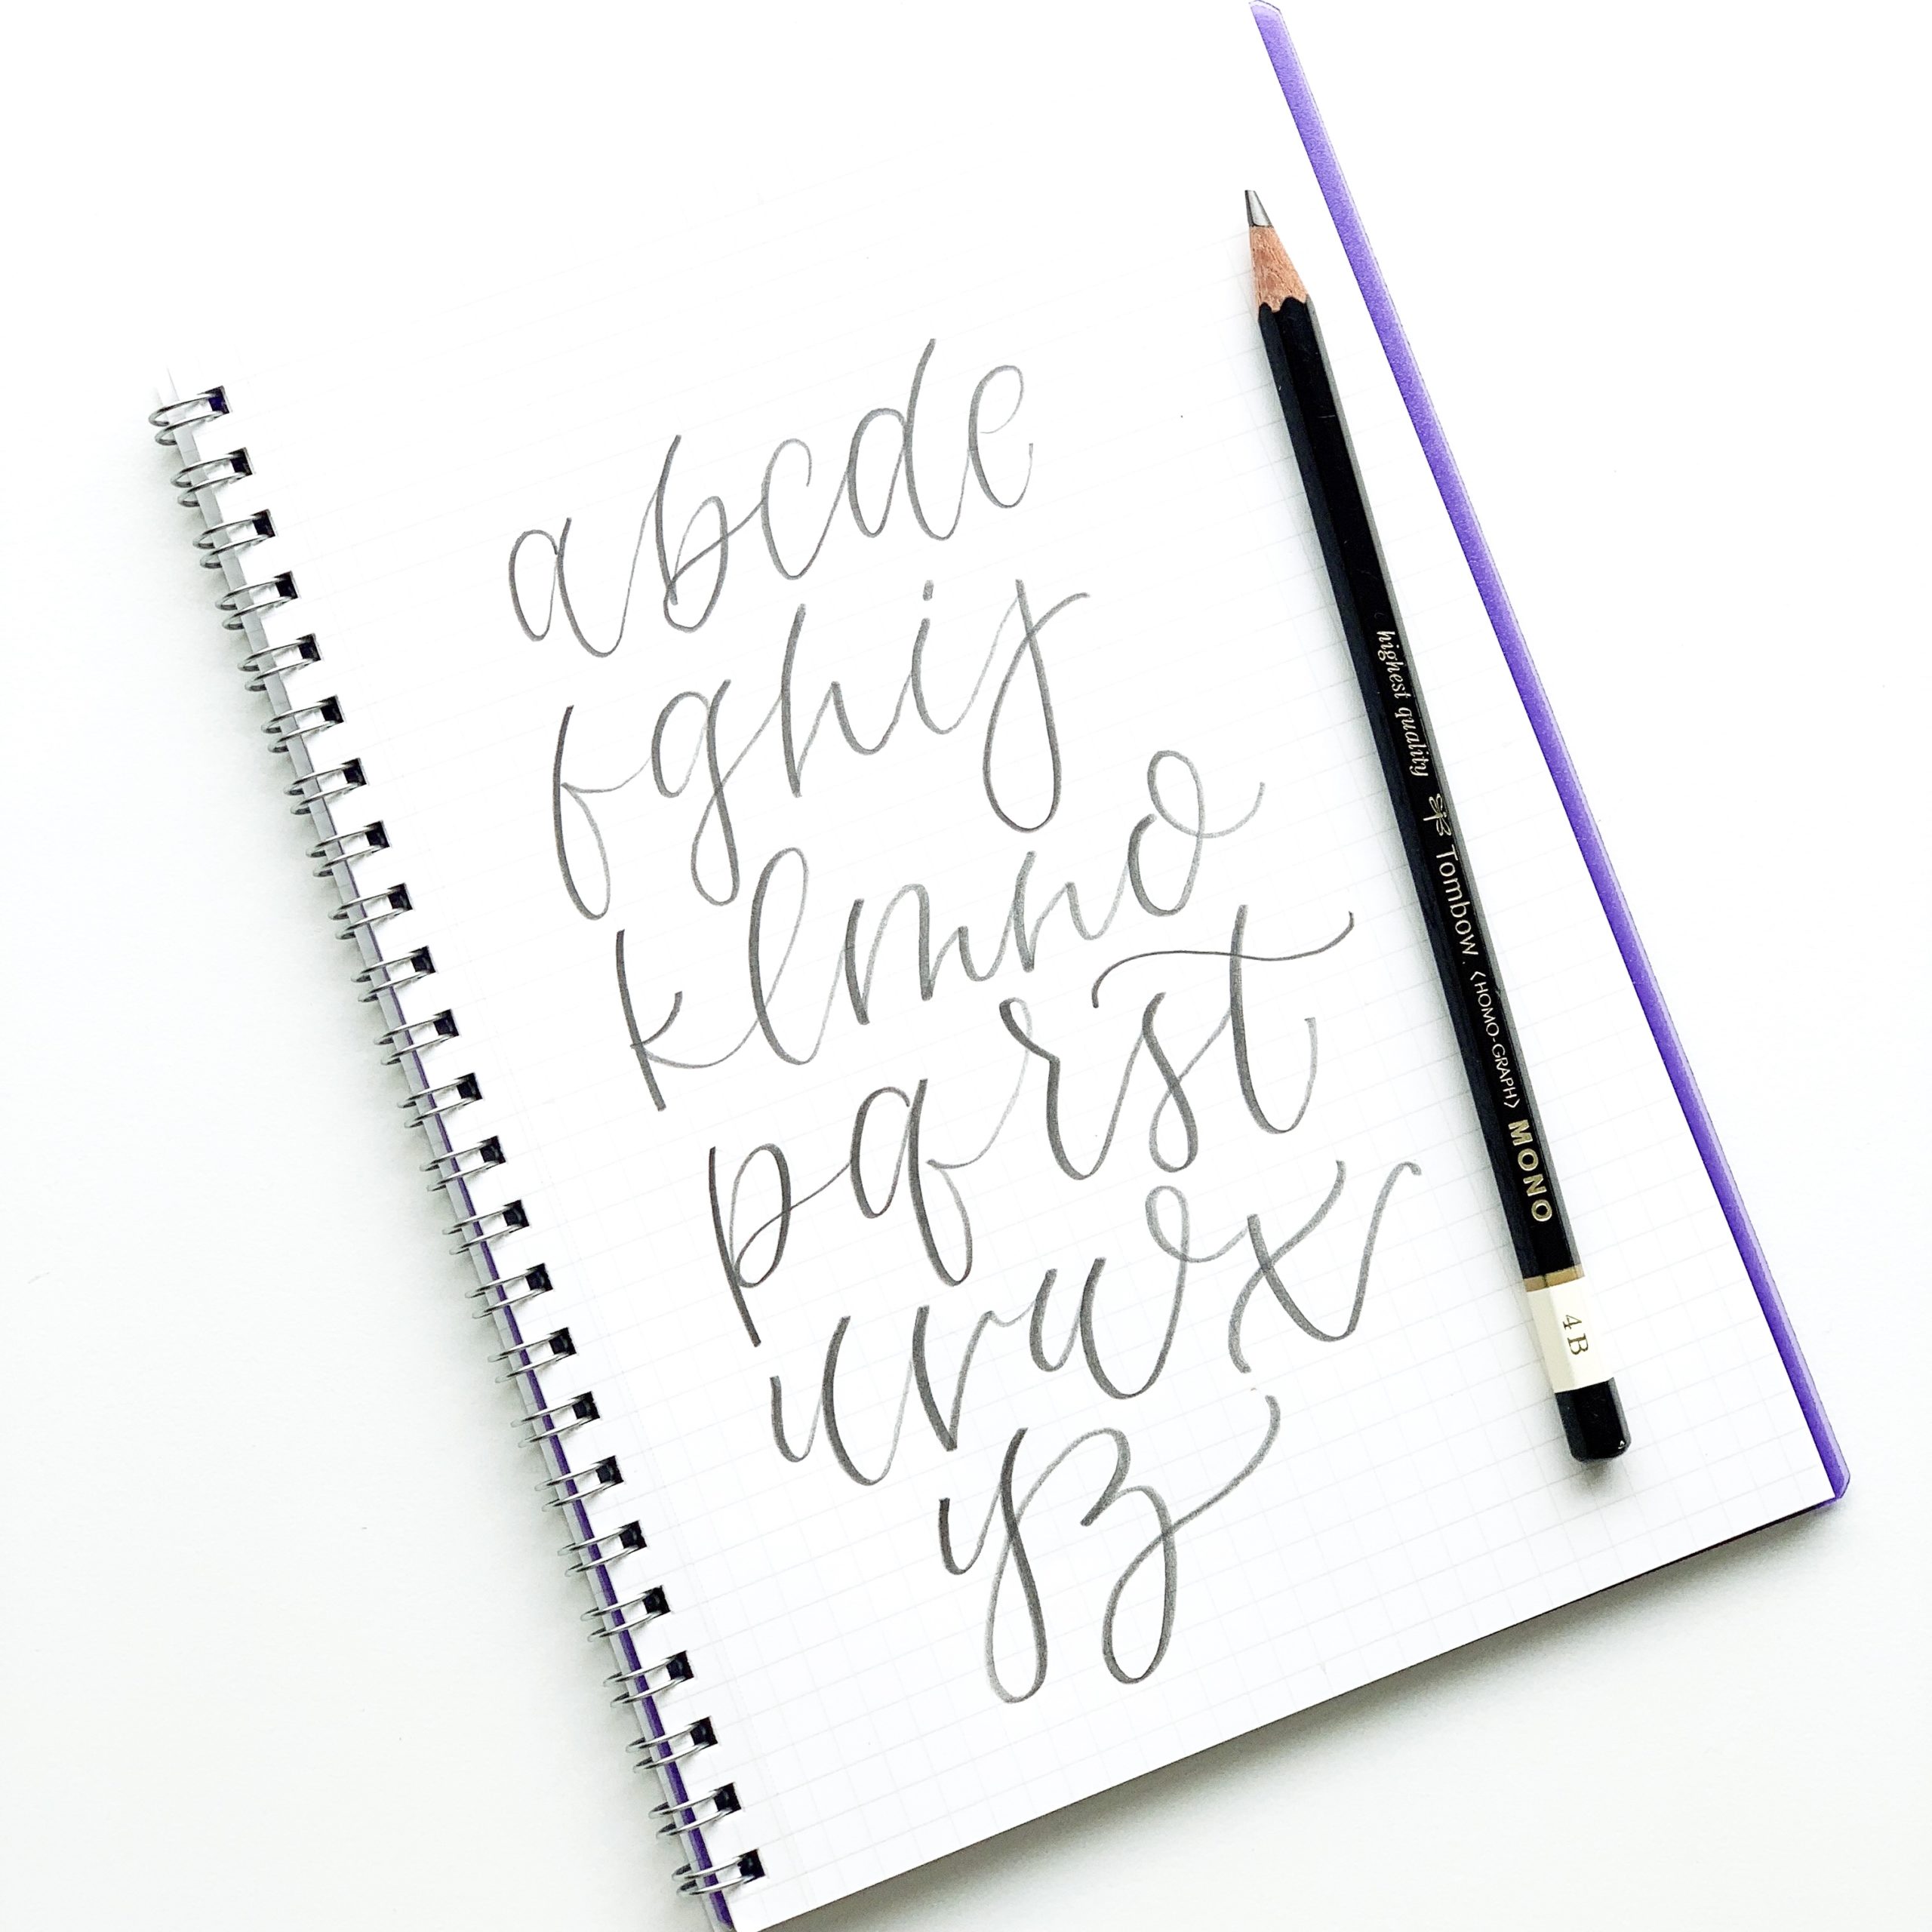 Learn five exercises to improve your hand lettering with Adrienne from @studio80design!